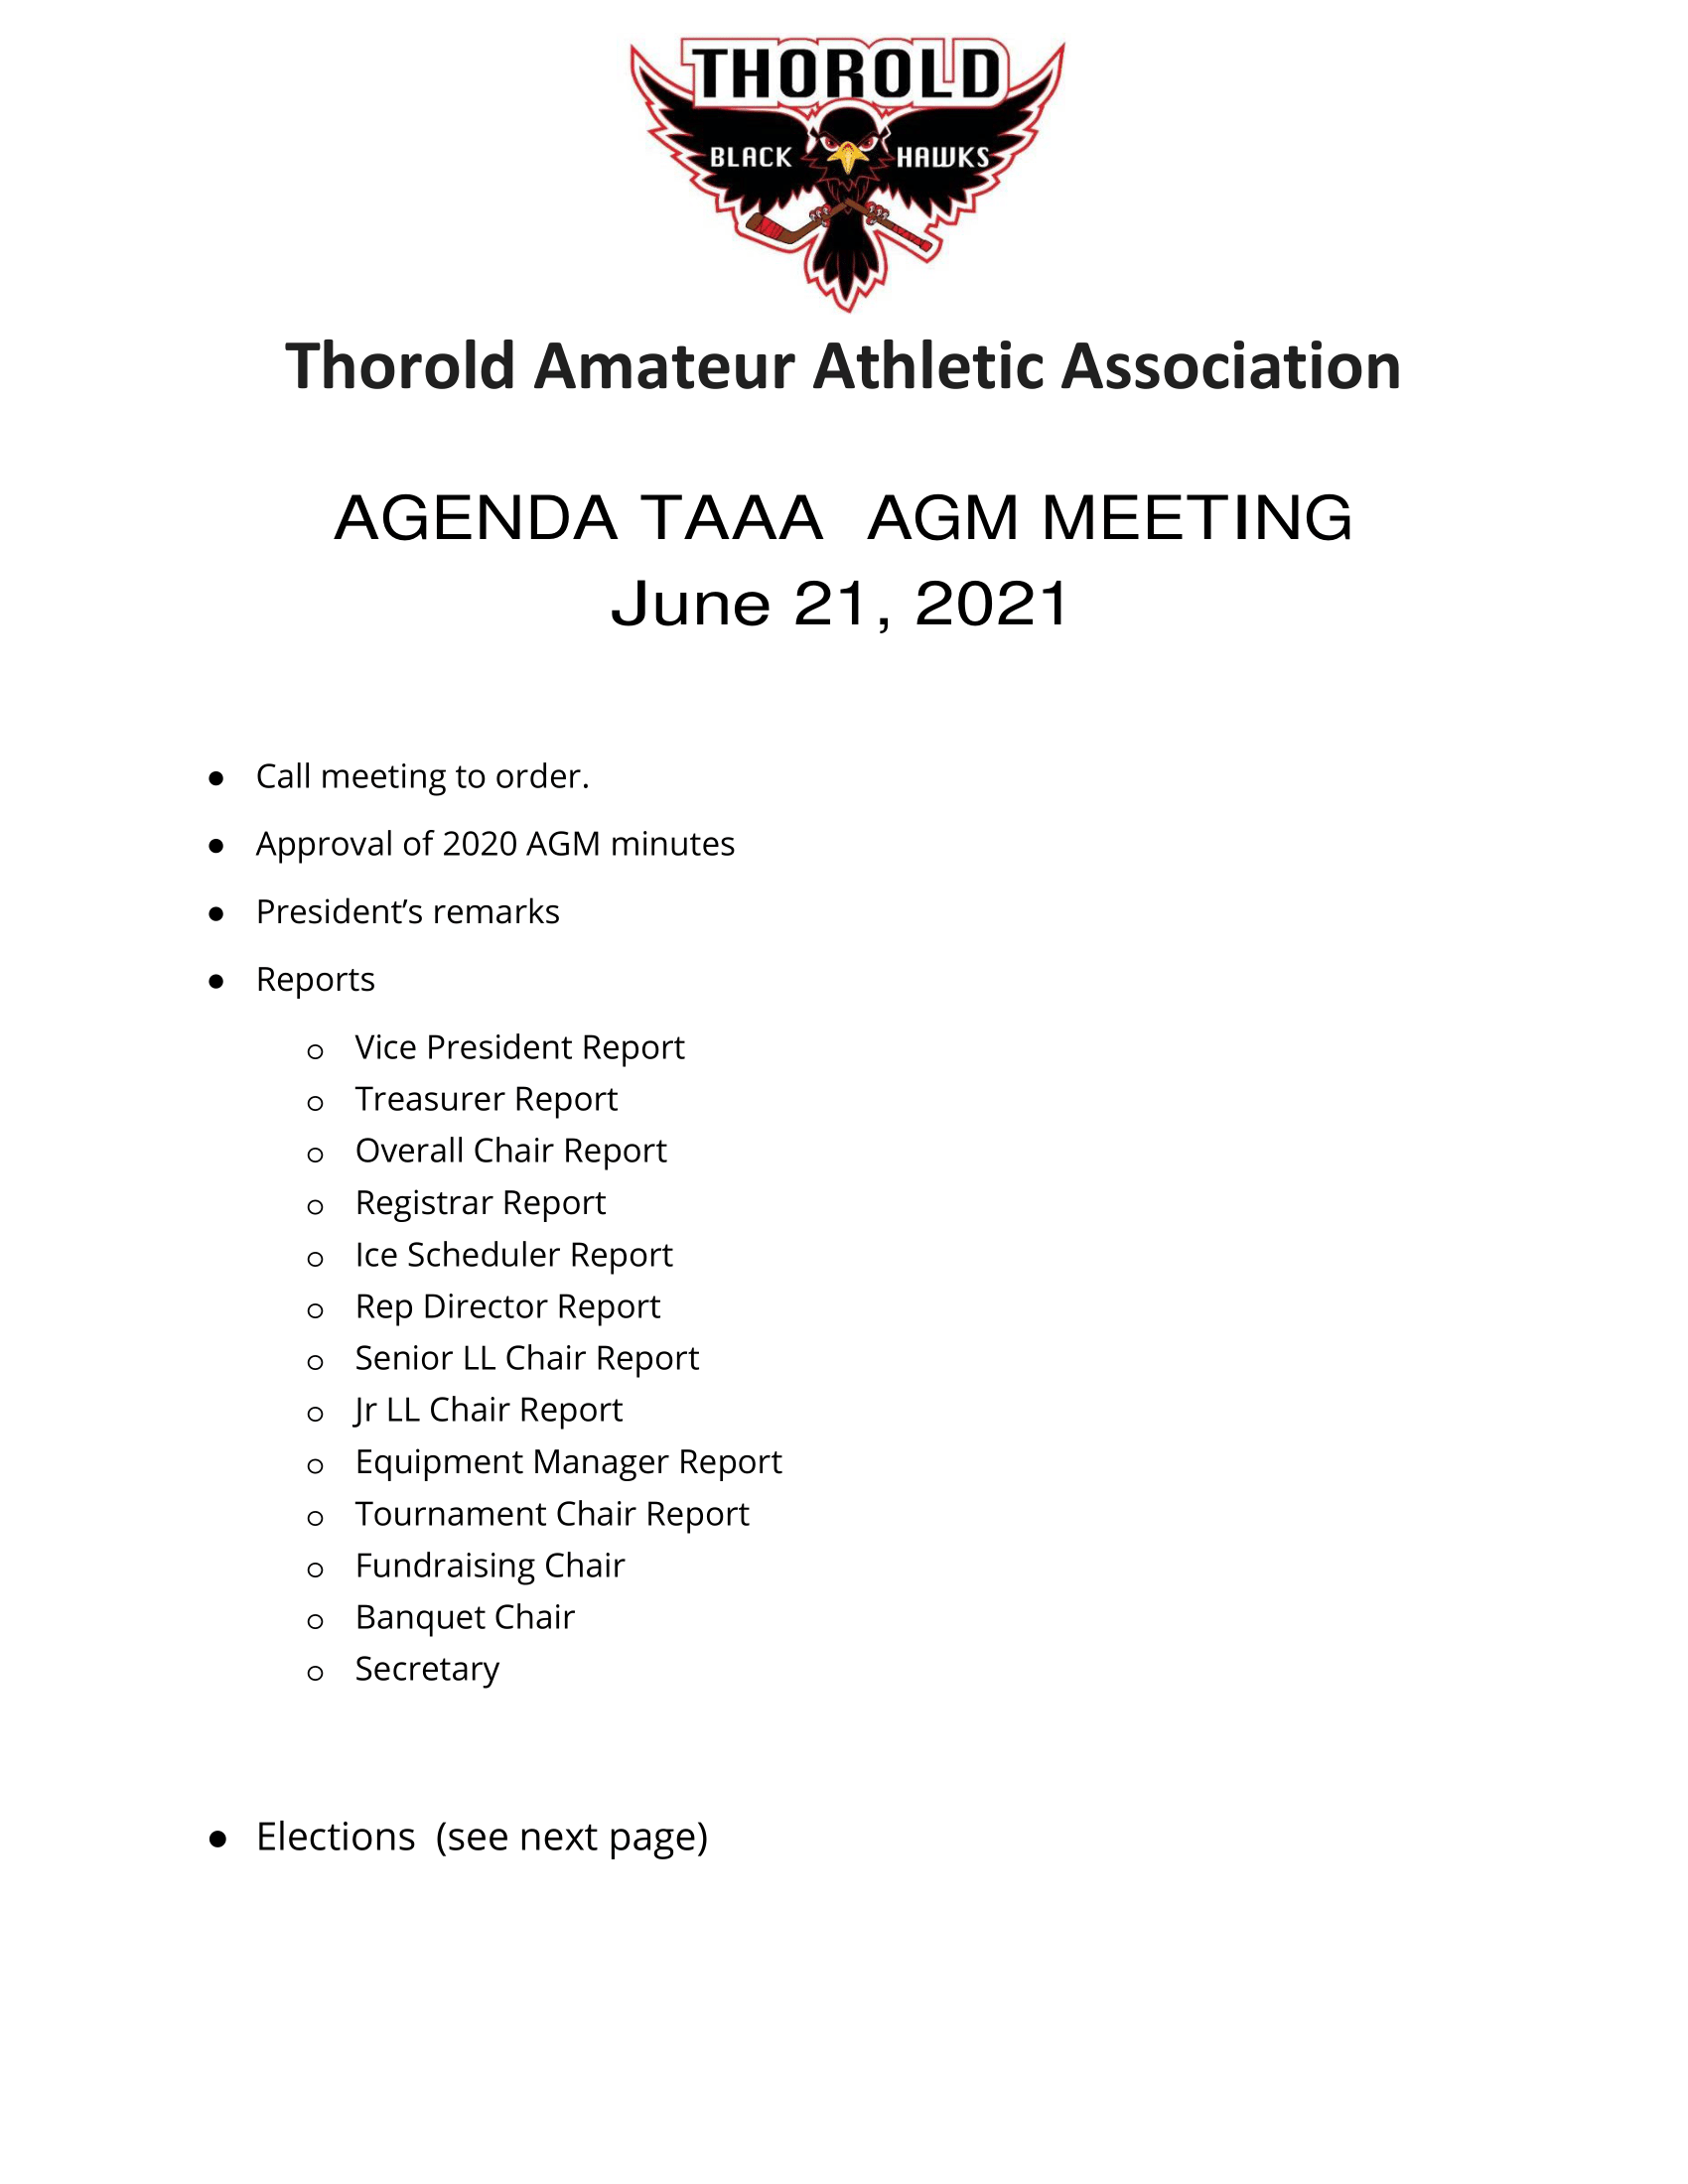 AGM_TAAA_information_2021_Website_-2.png